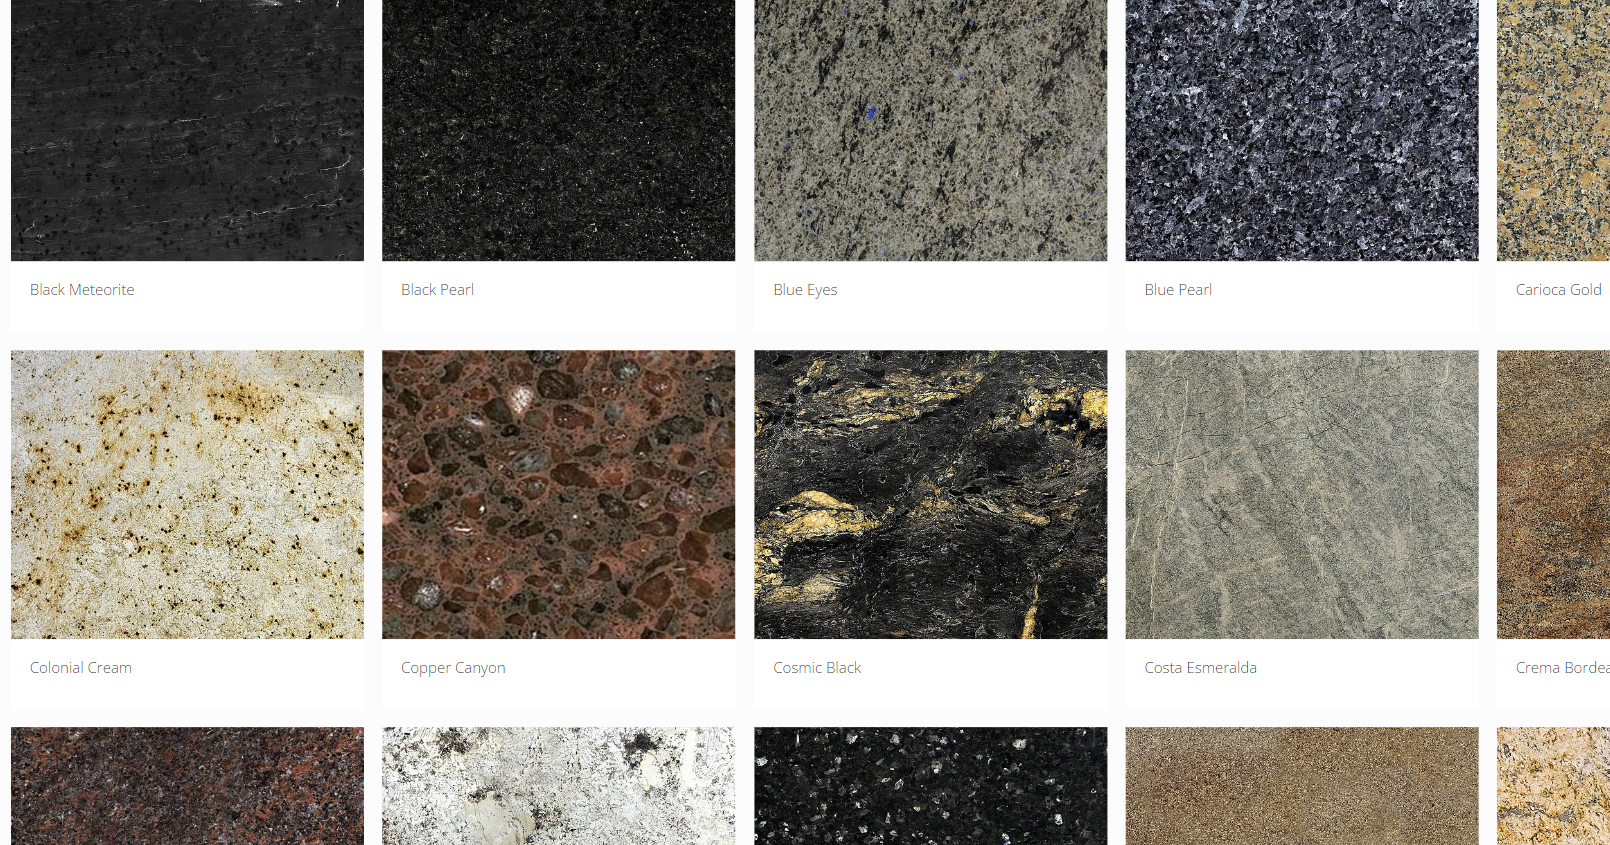 Granite with large flecks of dark and light blue, white, grey and black.